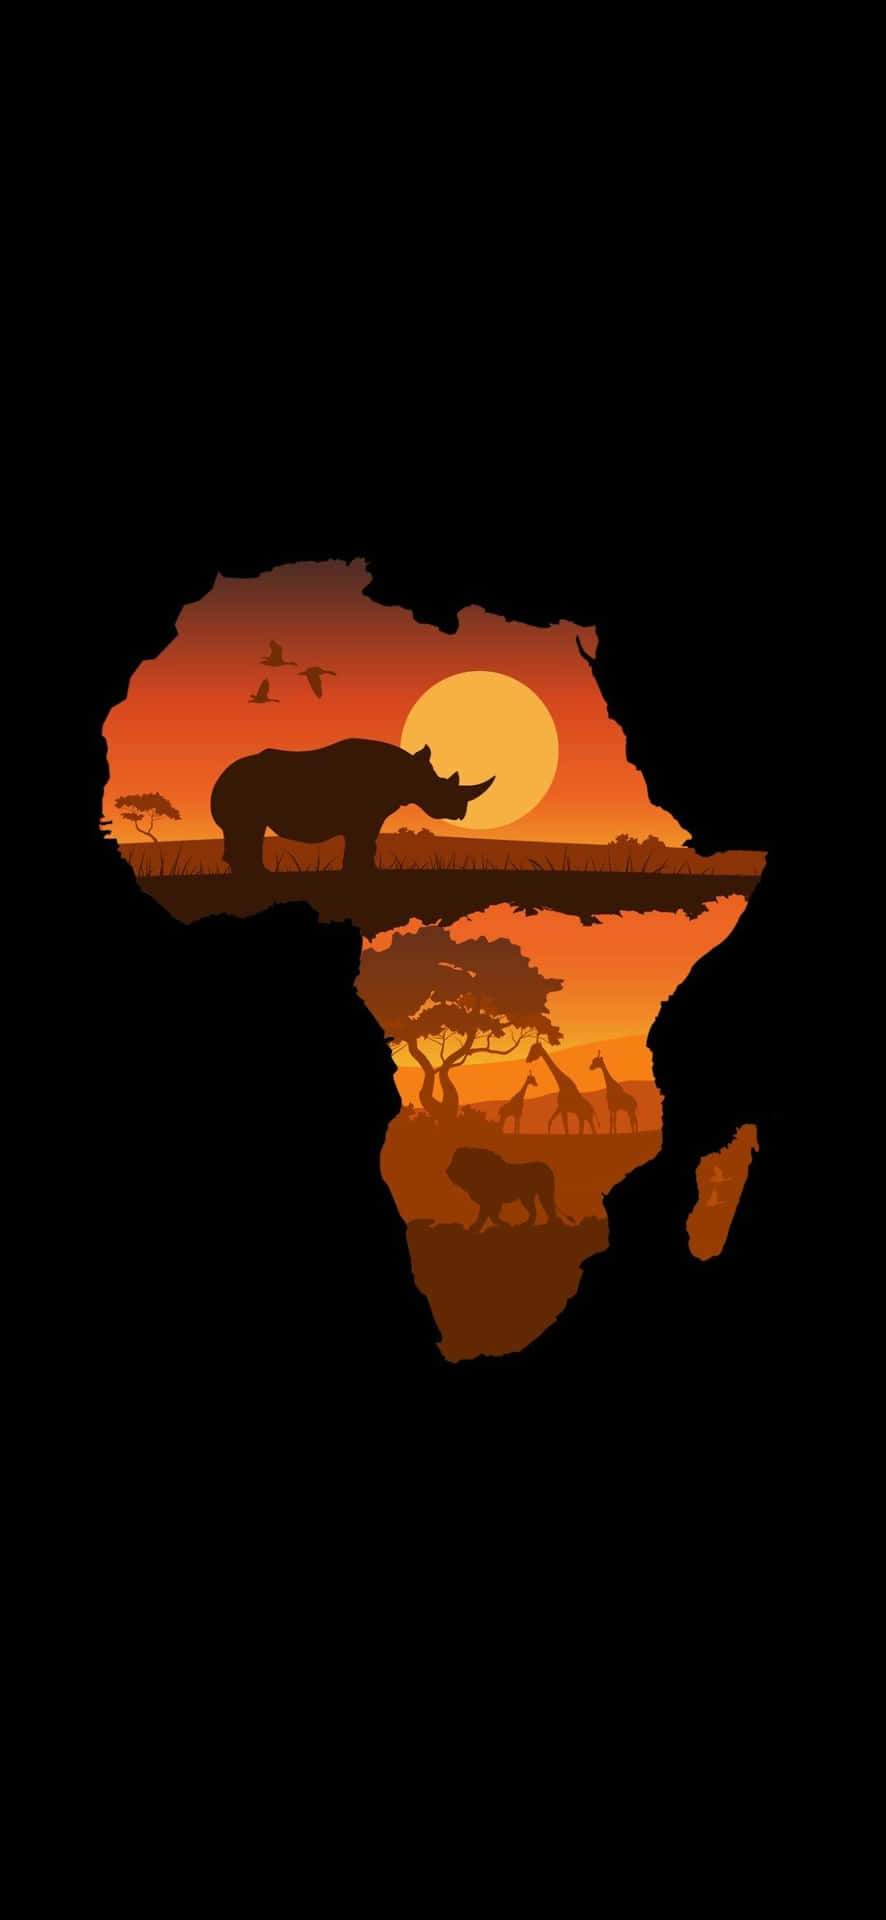 A Vibrant African Mobile Experience Wallpaper